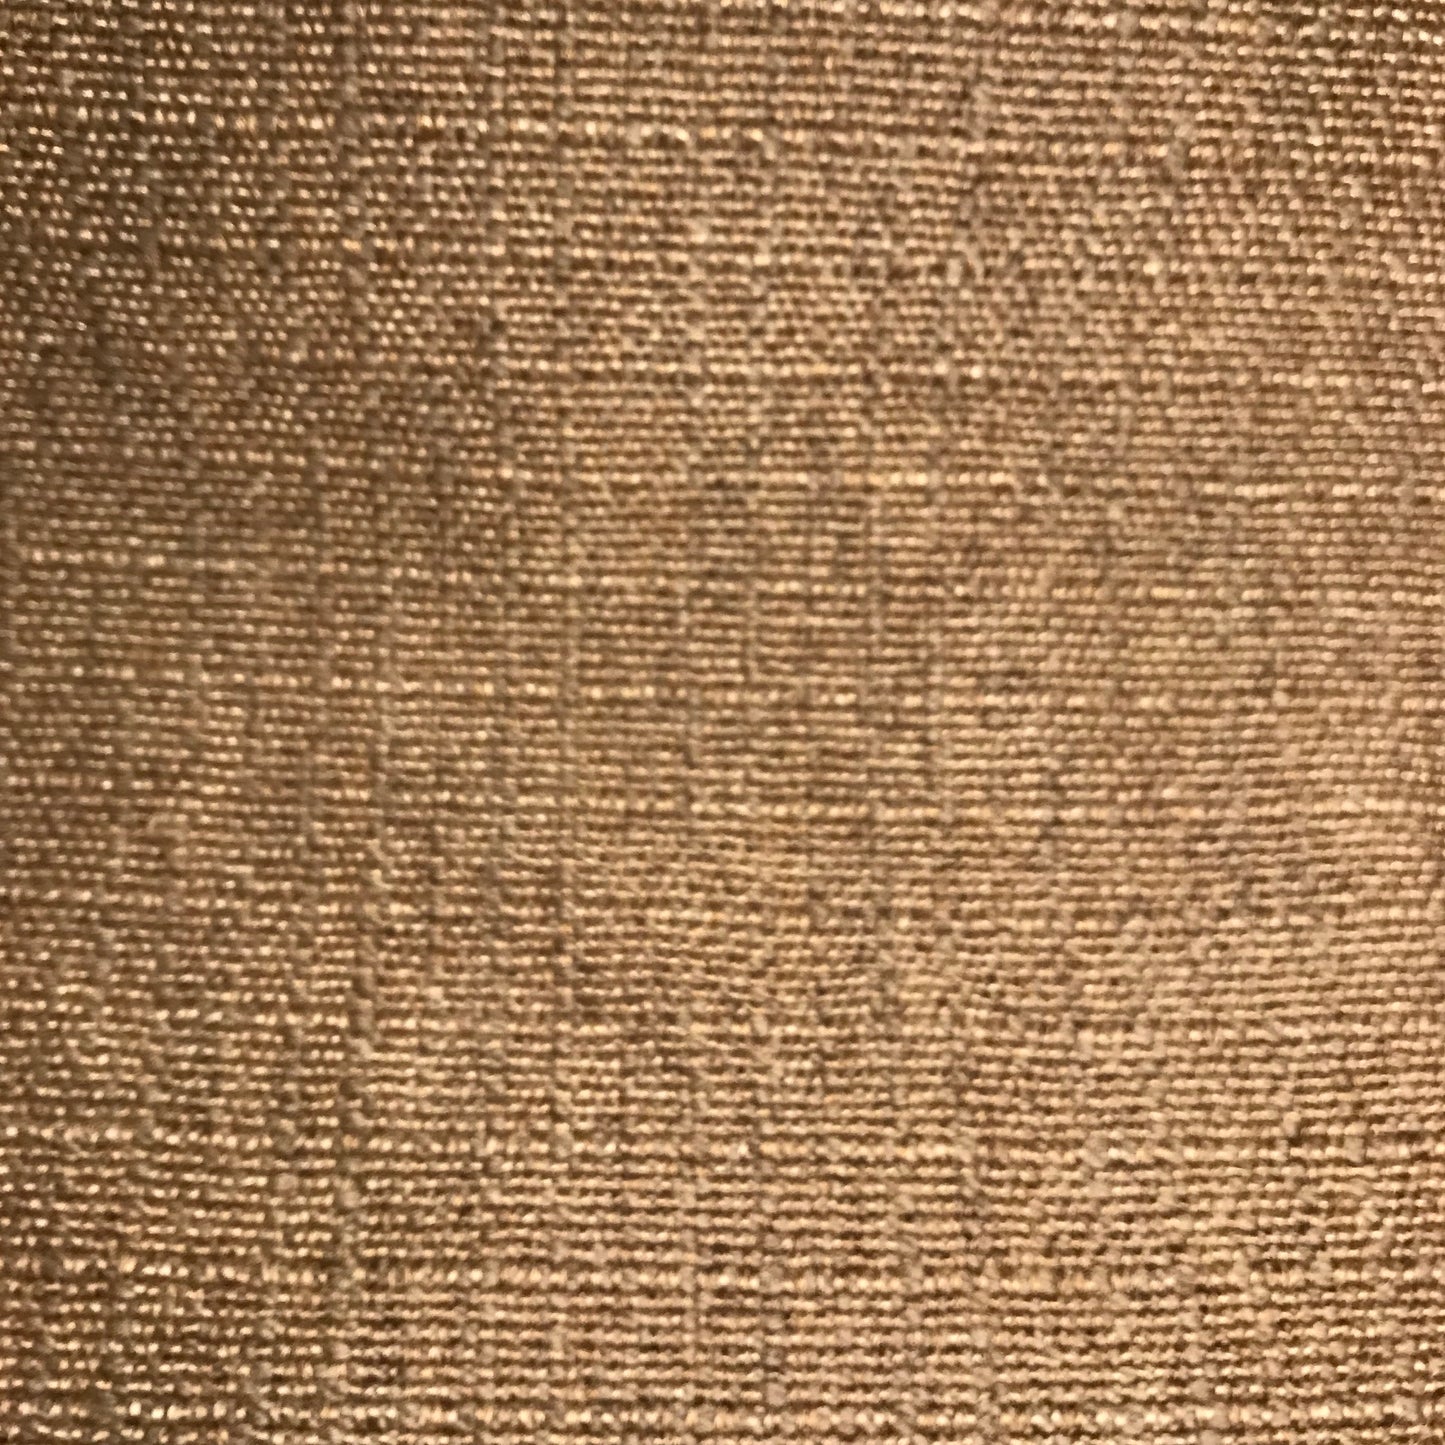 Upholstry Fabric Brown